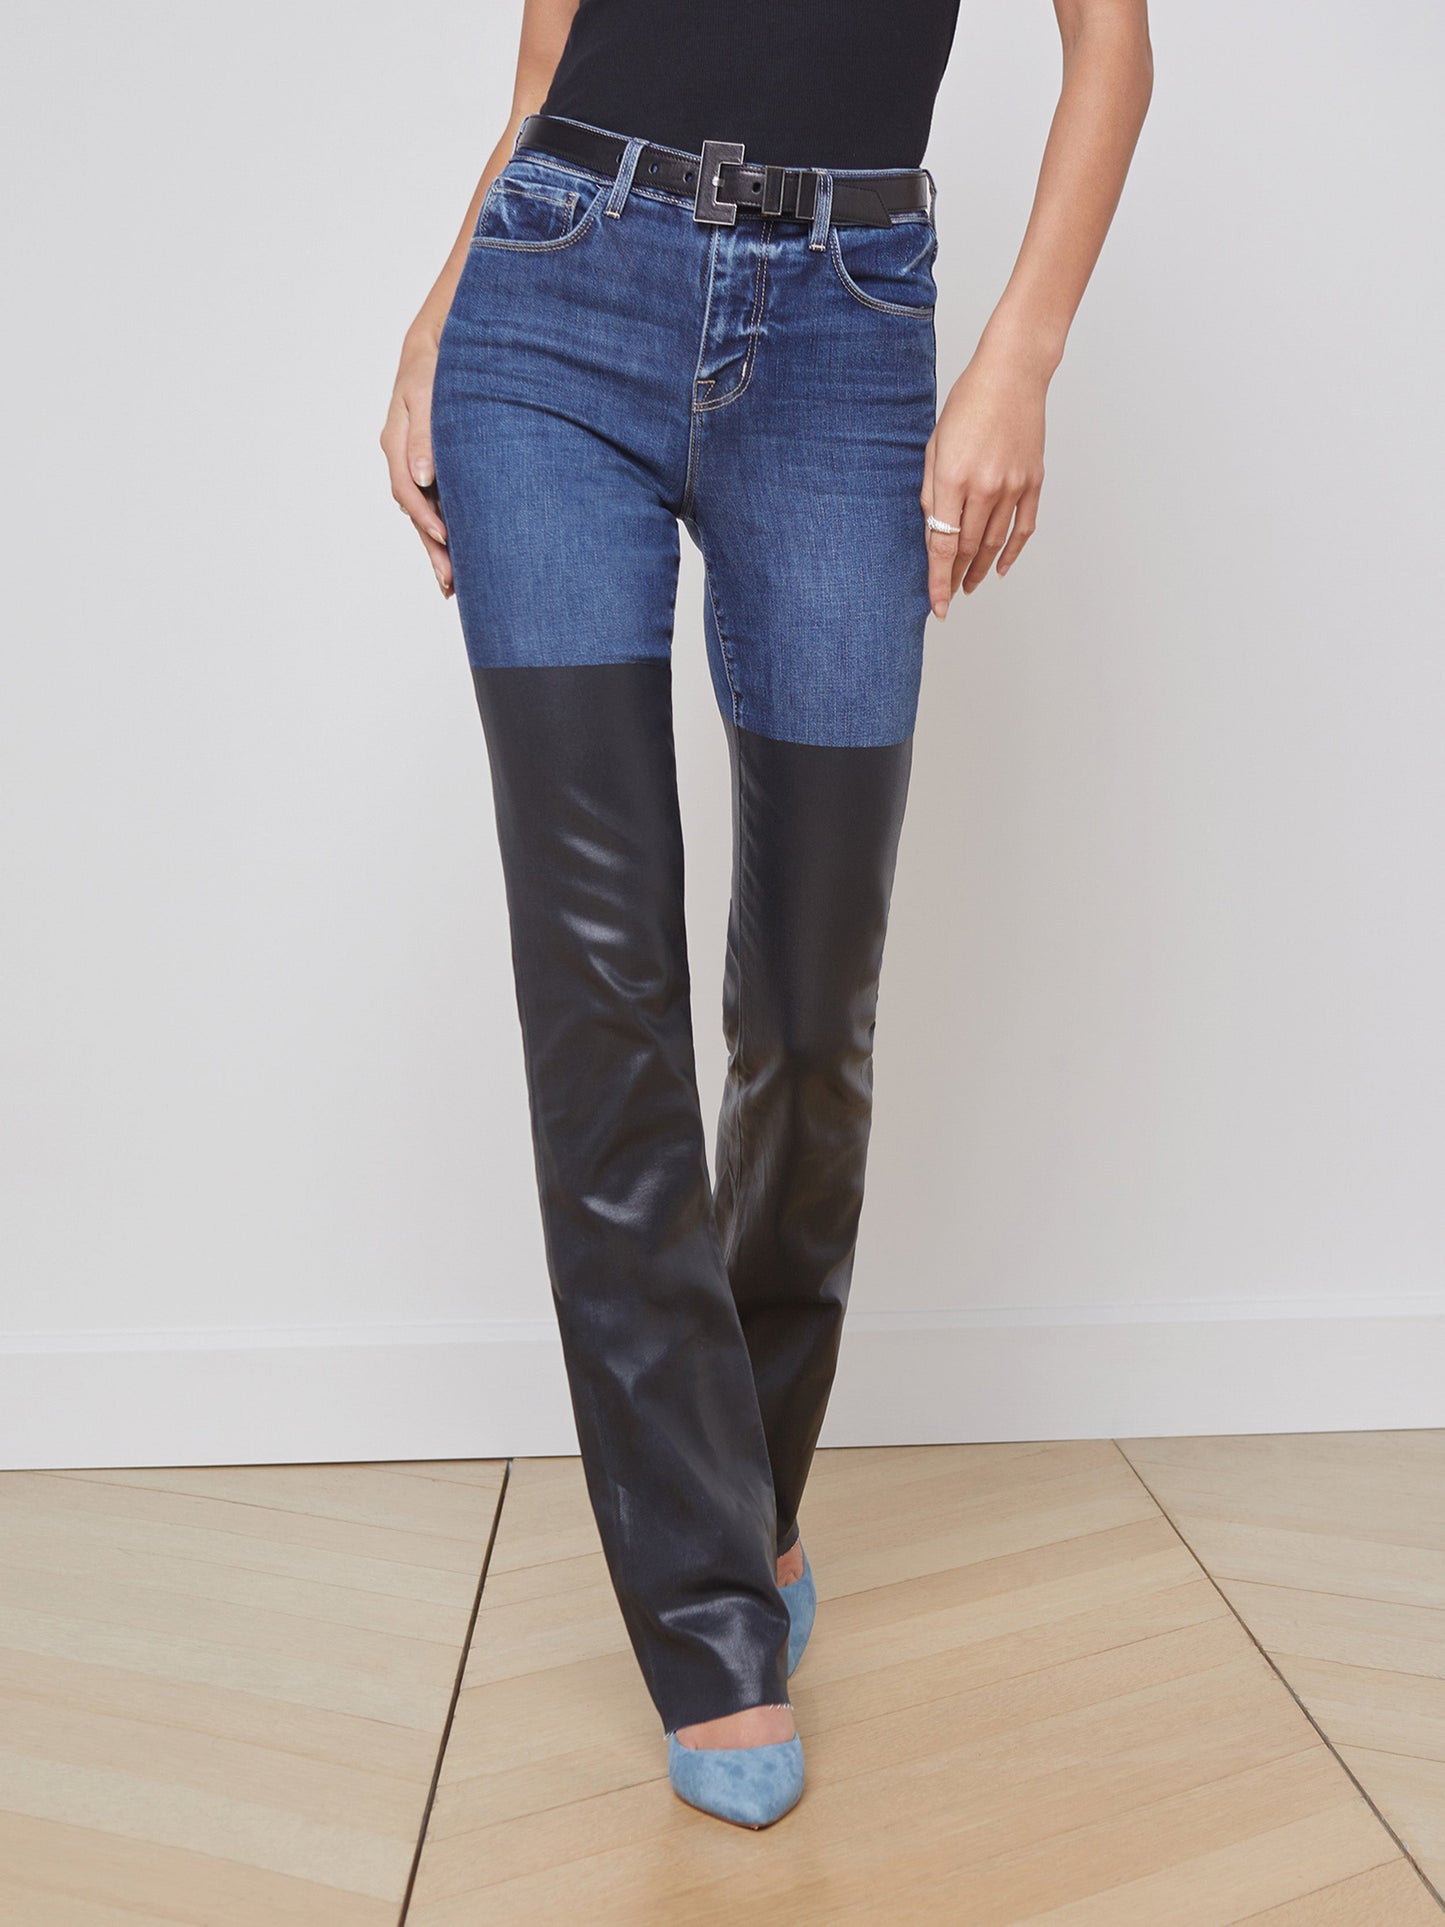 Lagence Ruth Coated Jean